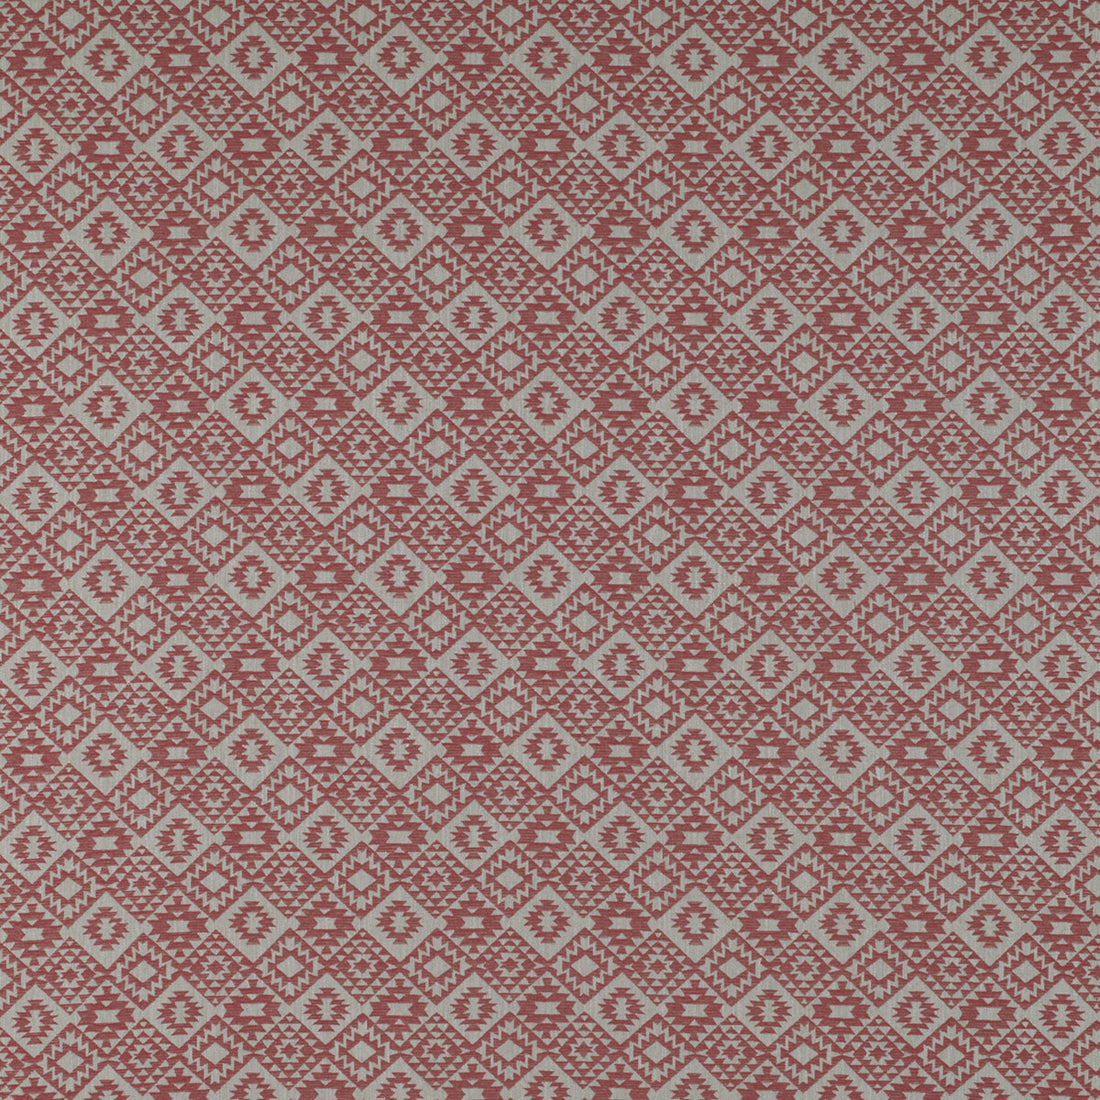 Lecco fabric in rojo color - pattern GDT5323.004.0 - by Gaston y Daniela in the Tierras collection